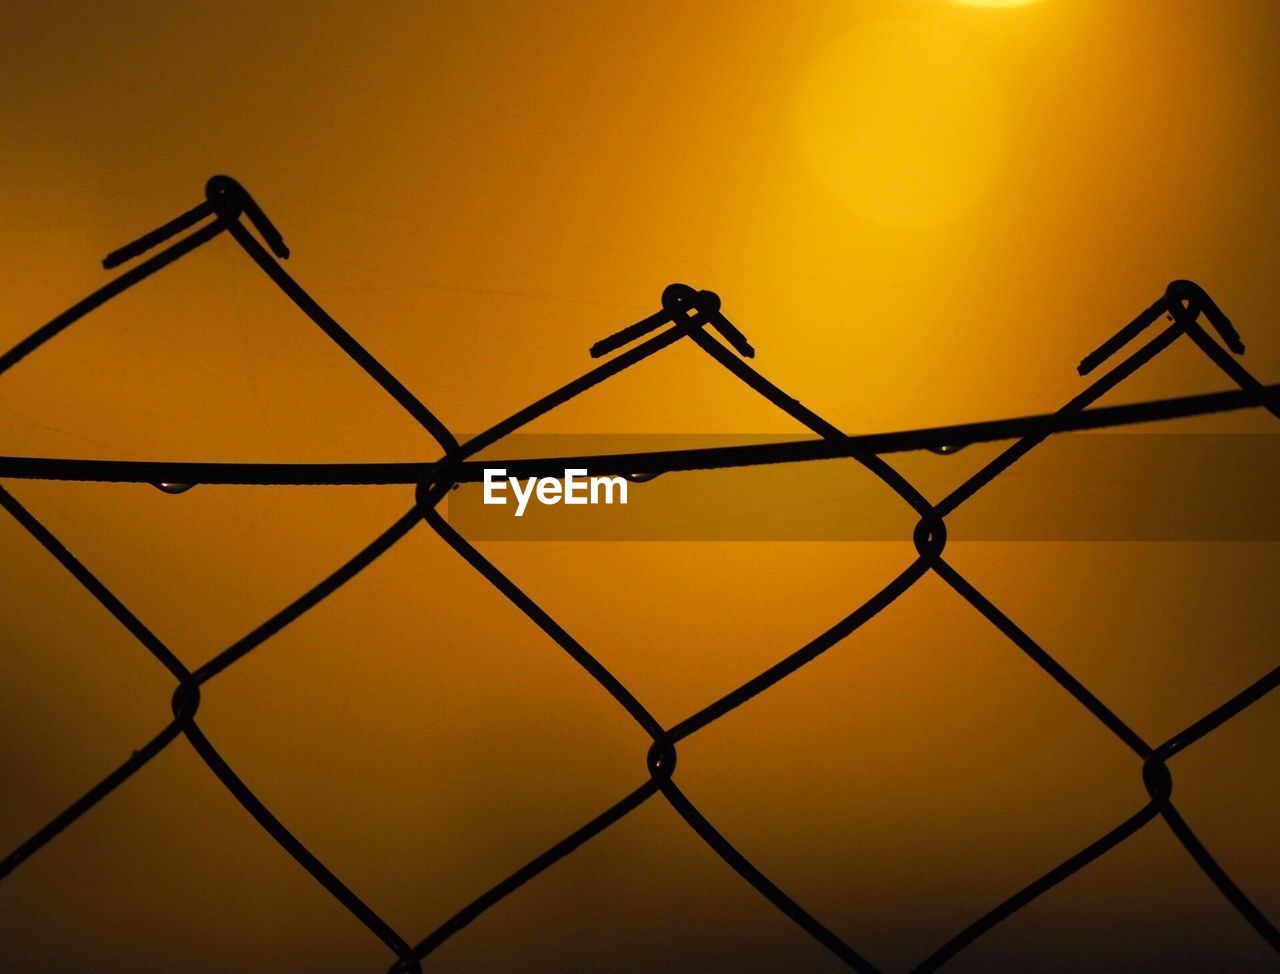 Close-up of silhouette chainlink fence against sky during sunset